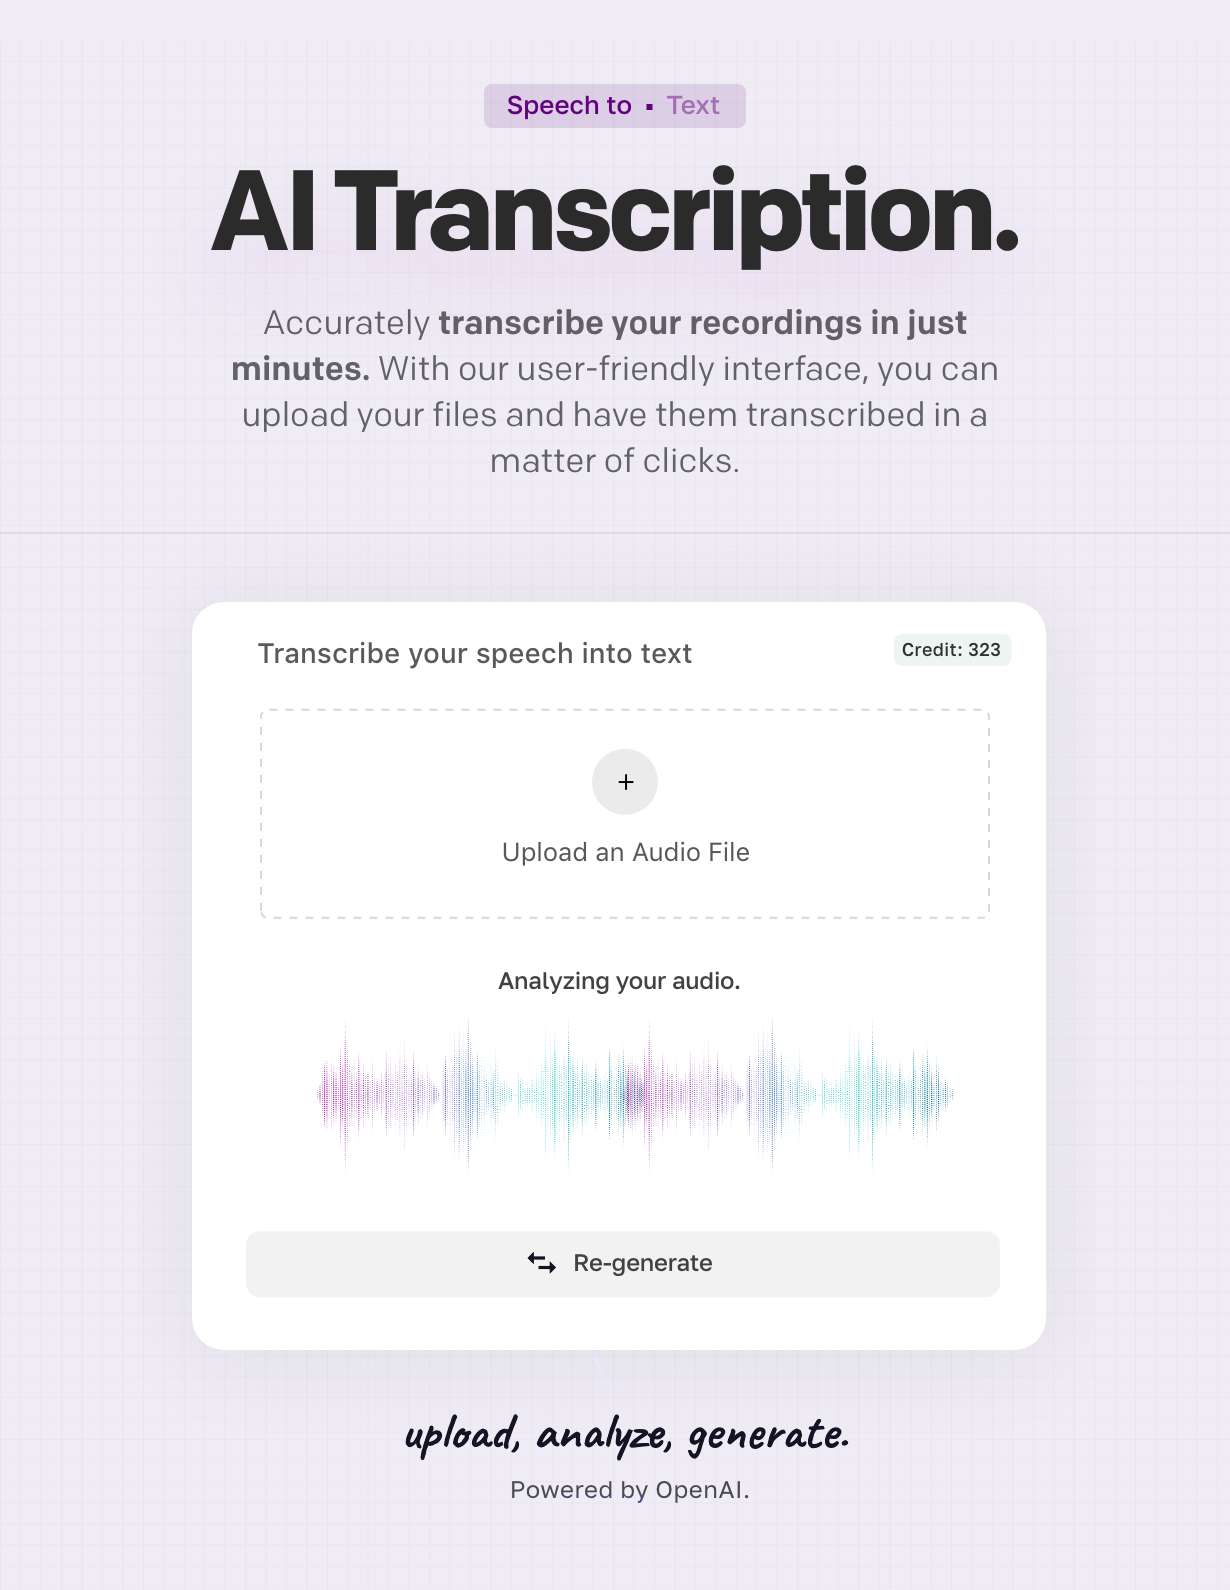 MagicAI - OpenAI Content, Text, Image, Video, Chat, Voice, and Code Generator as SaaS - 33